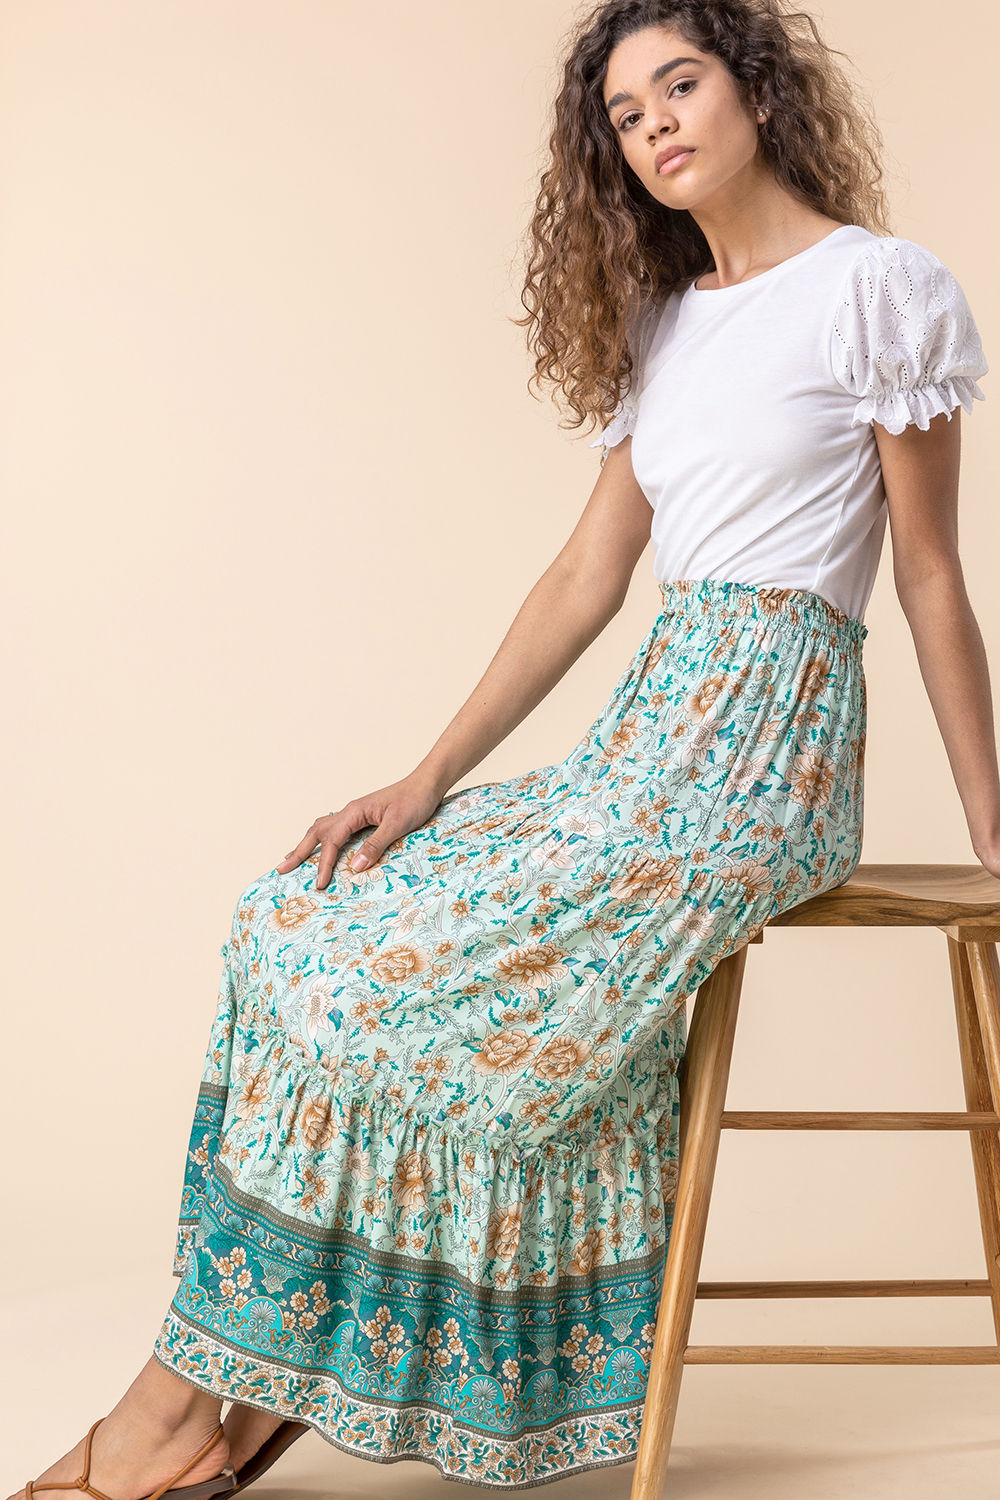 Mint Tiered Floral Print Maxi Skirt, Image 4 of 4